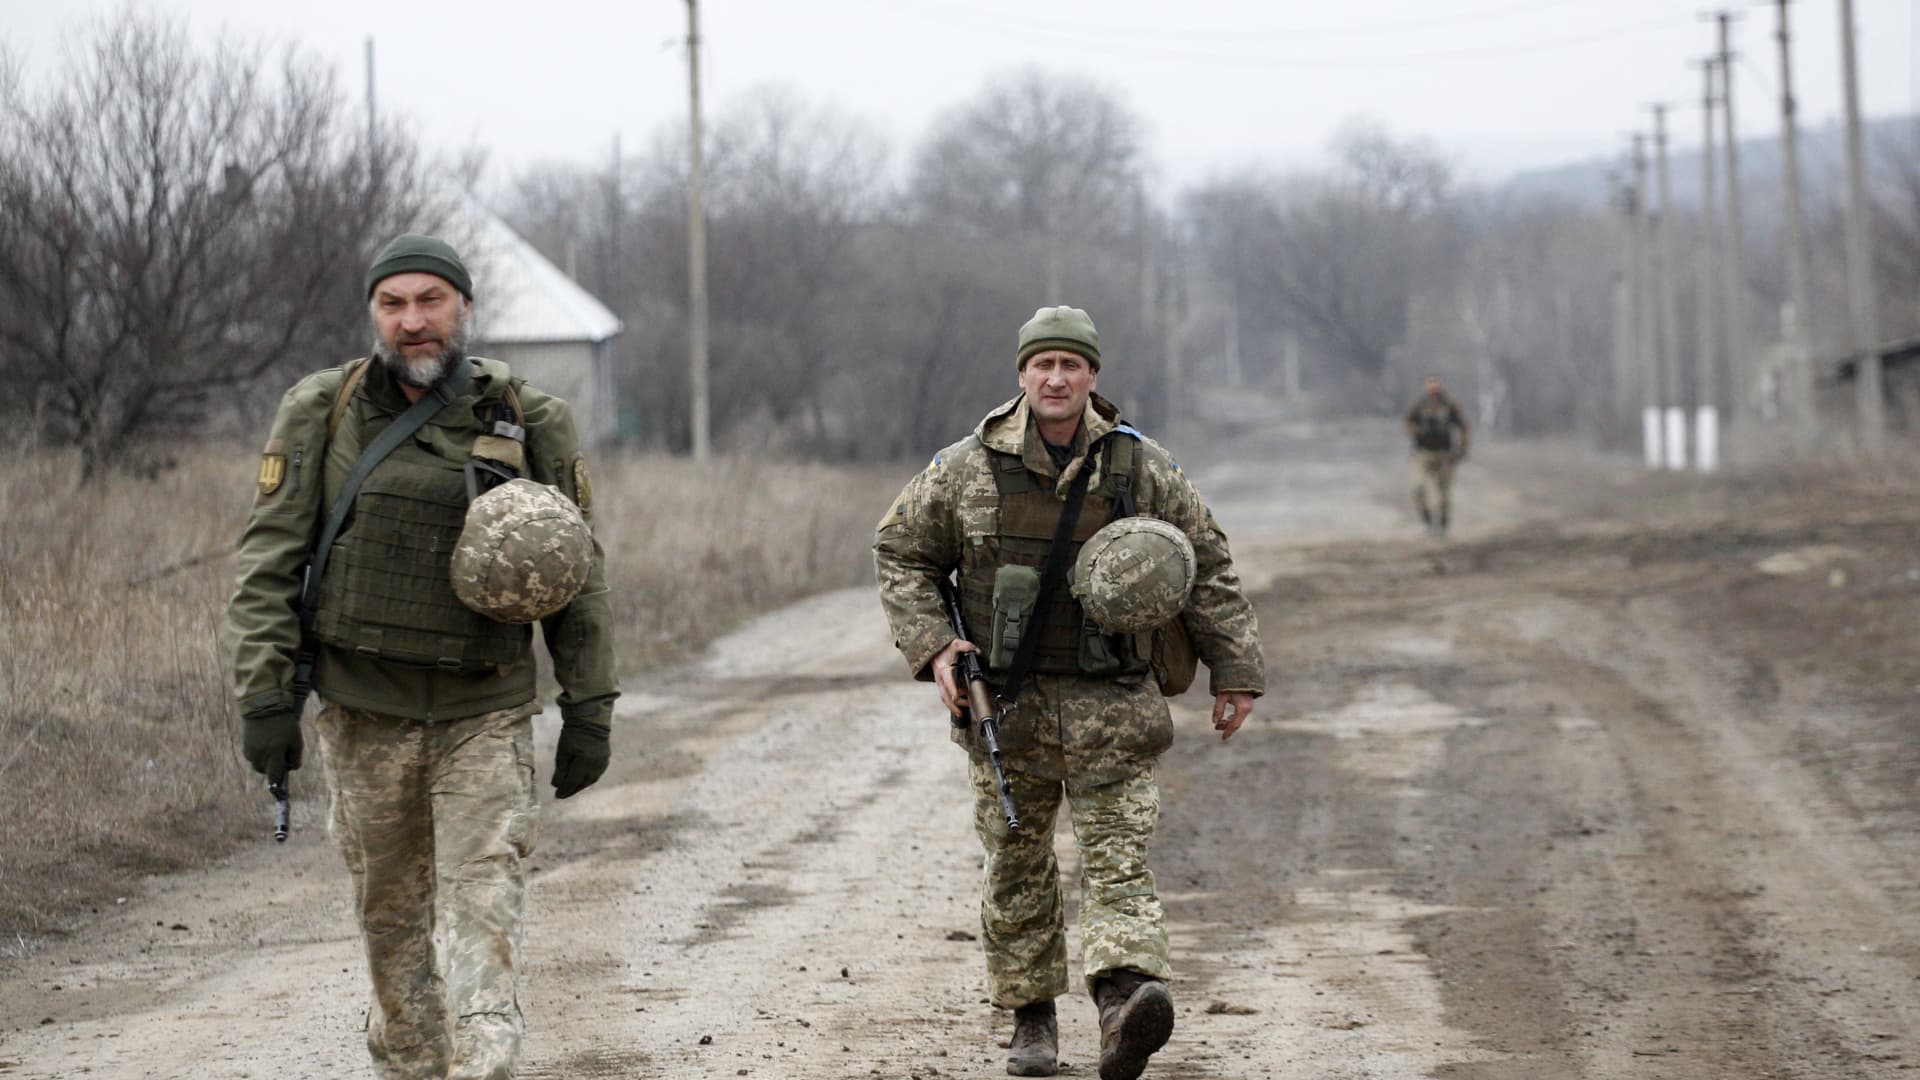 Ukrainian servicemen patrol in the settlement of Troitske in the Lugansk region near the front line with Russia-backed separatists on February 22, 2022.